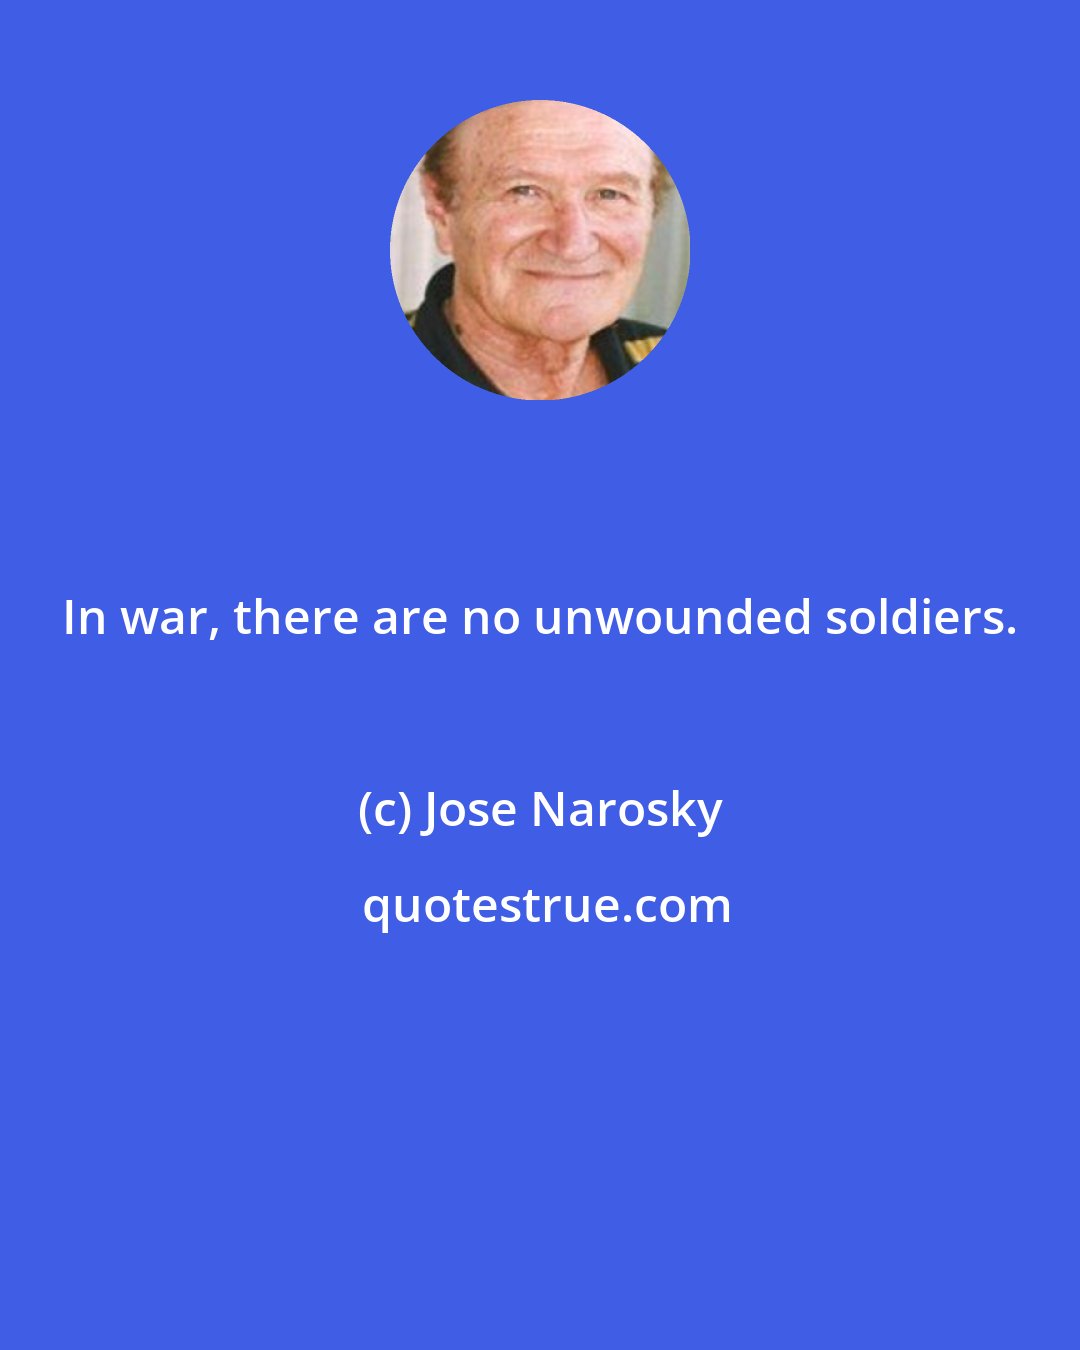 Jose Narosky: In war, there are no unwounded soldiers.